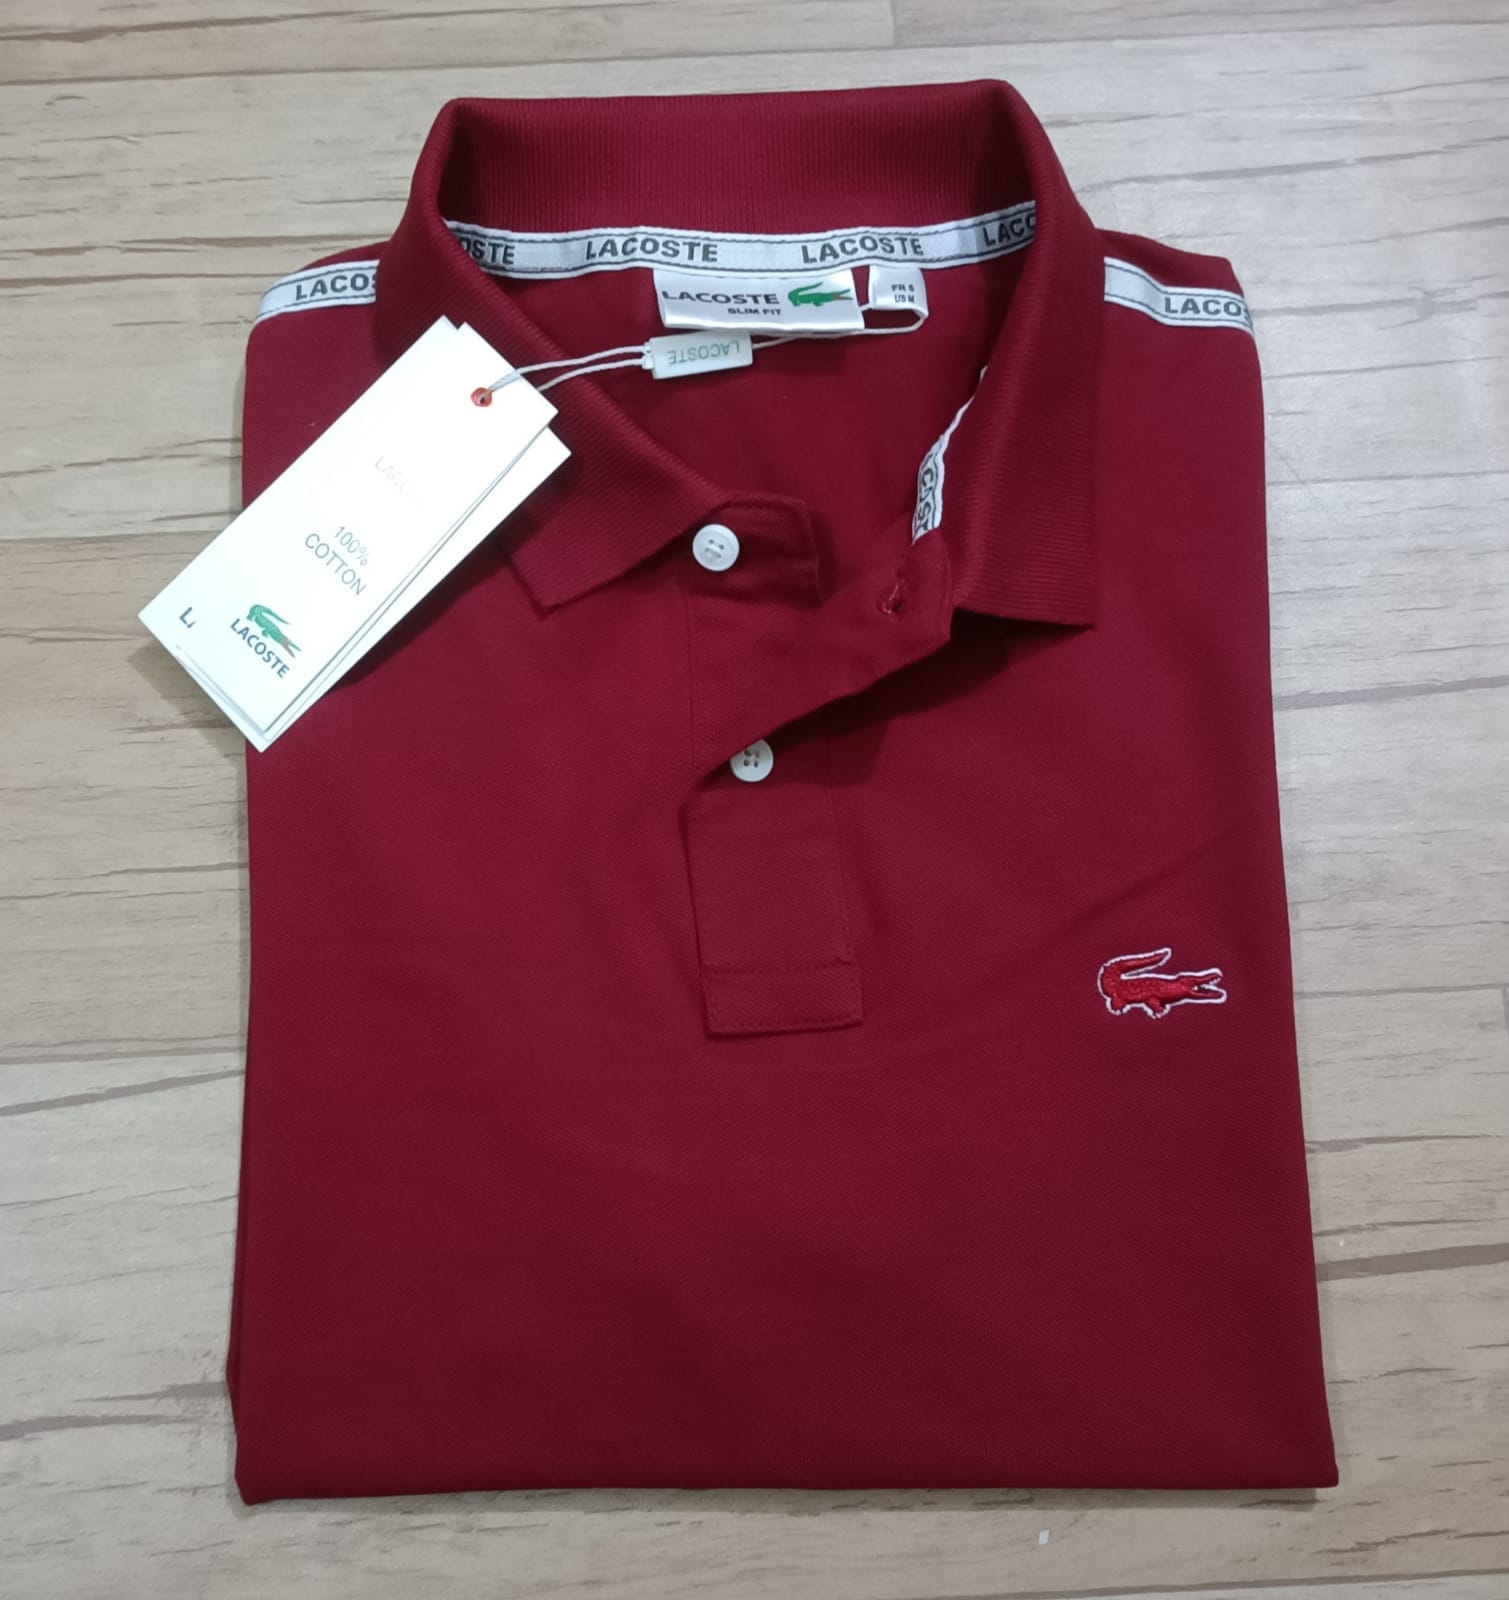 Imported Super Premium Cotton Polo Shirt For Men (ZAYSIPS09) - Maroon